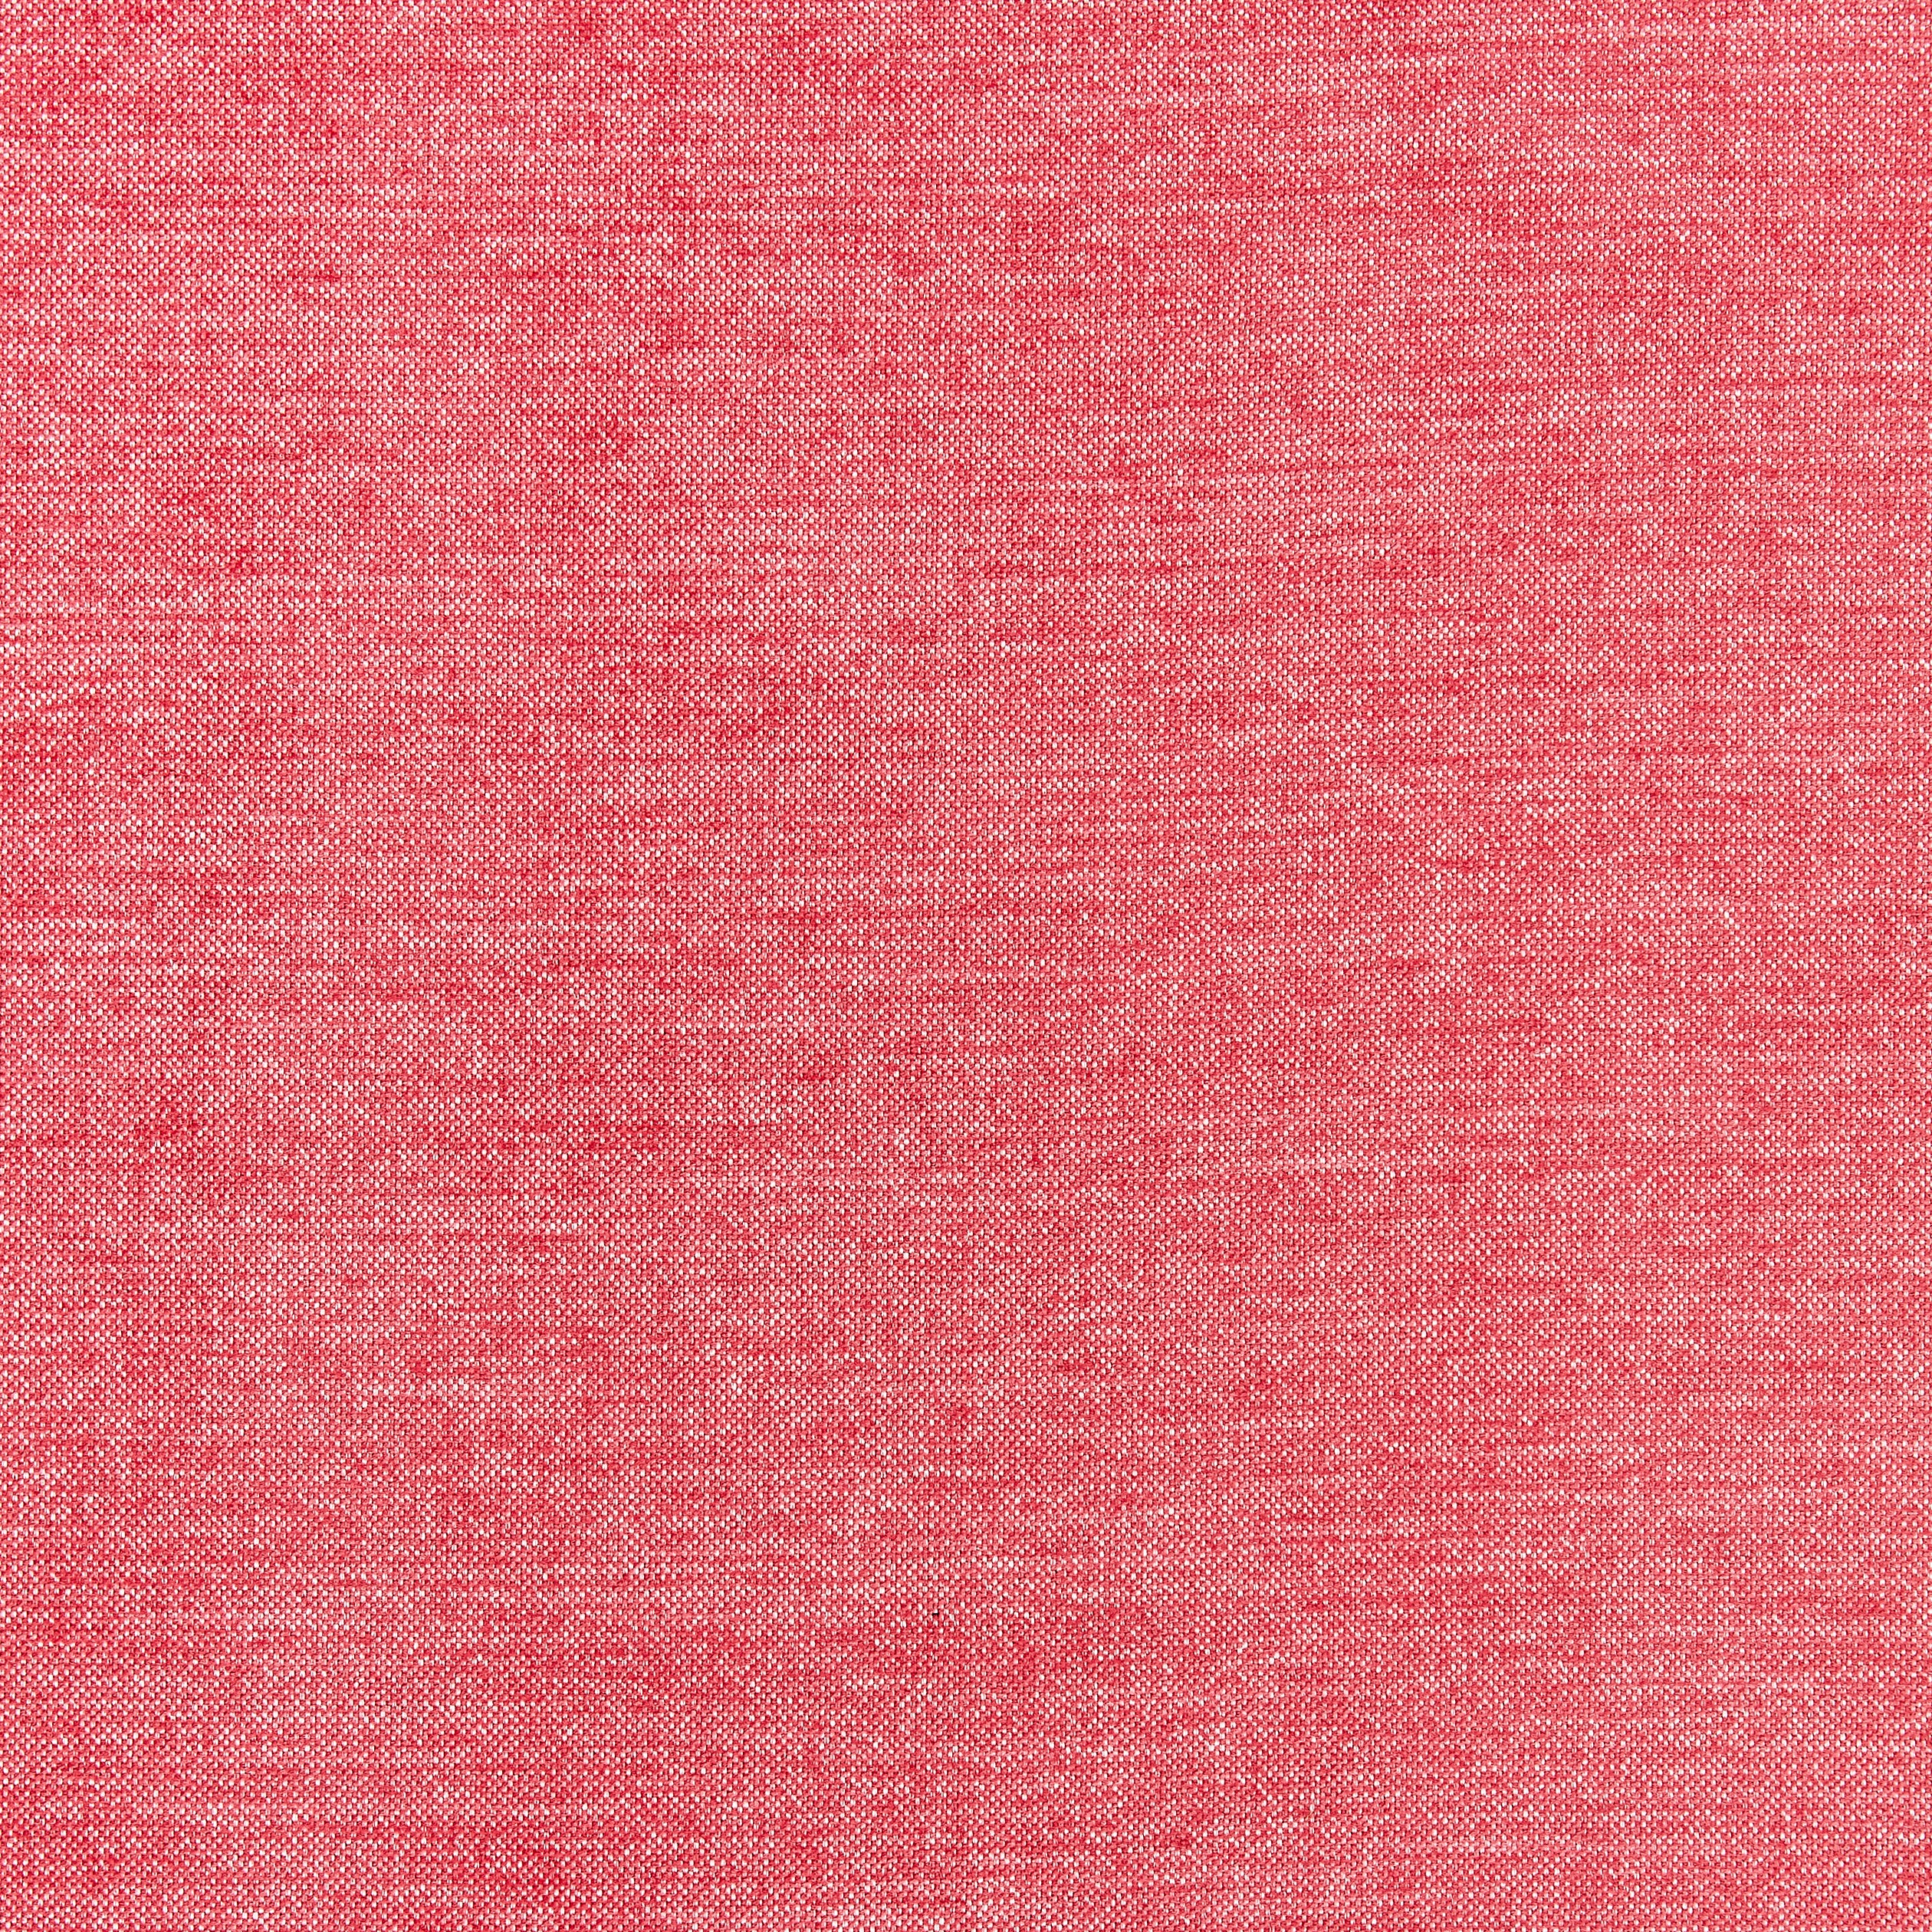 Aura fabric in peony color - pattern number W80275 - by Thibaut in the Kaleidoscope Fabrics collection